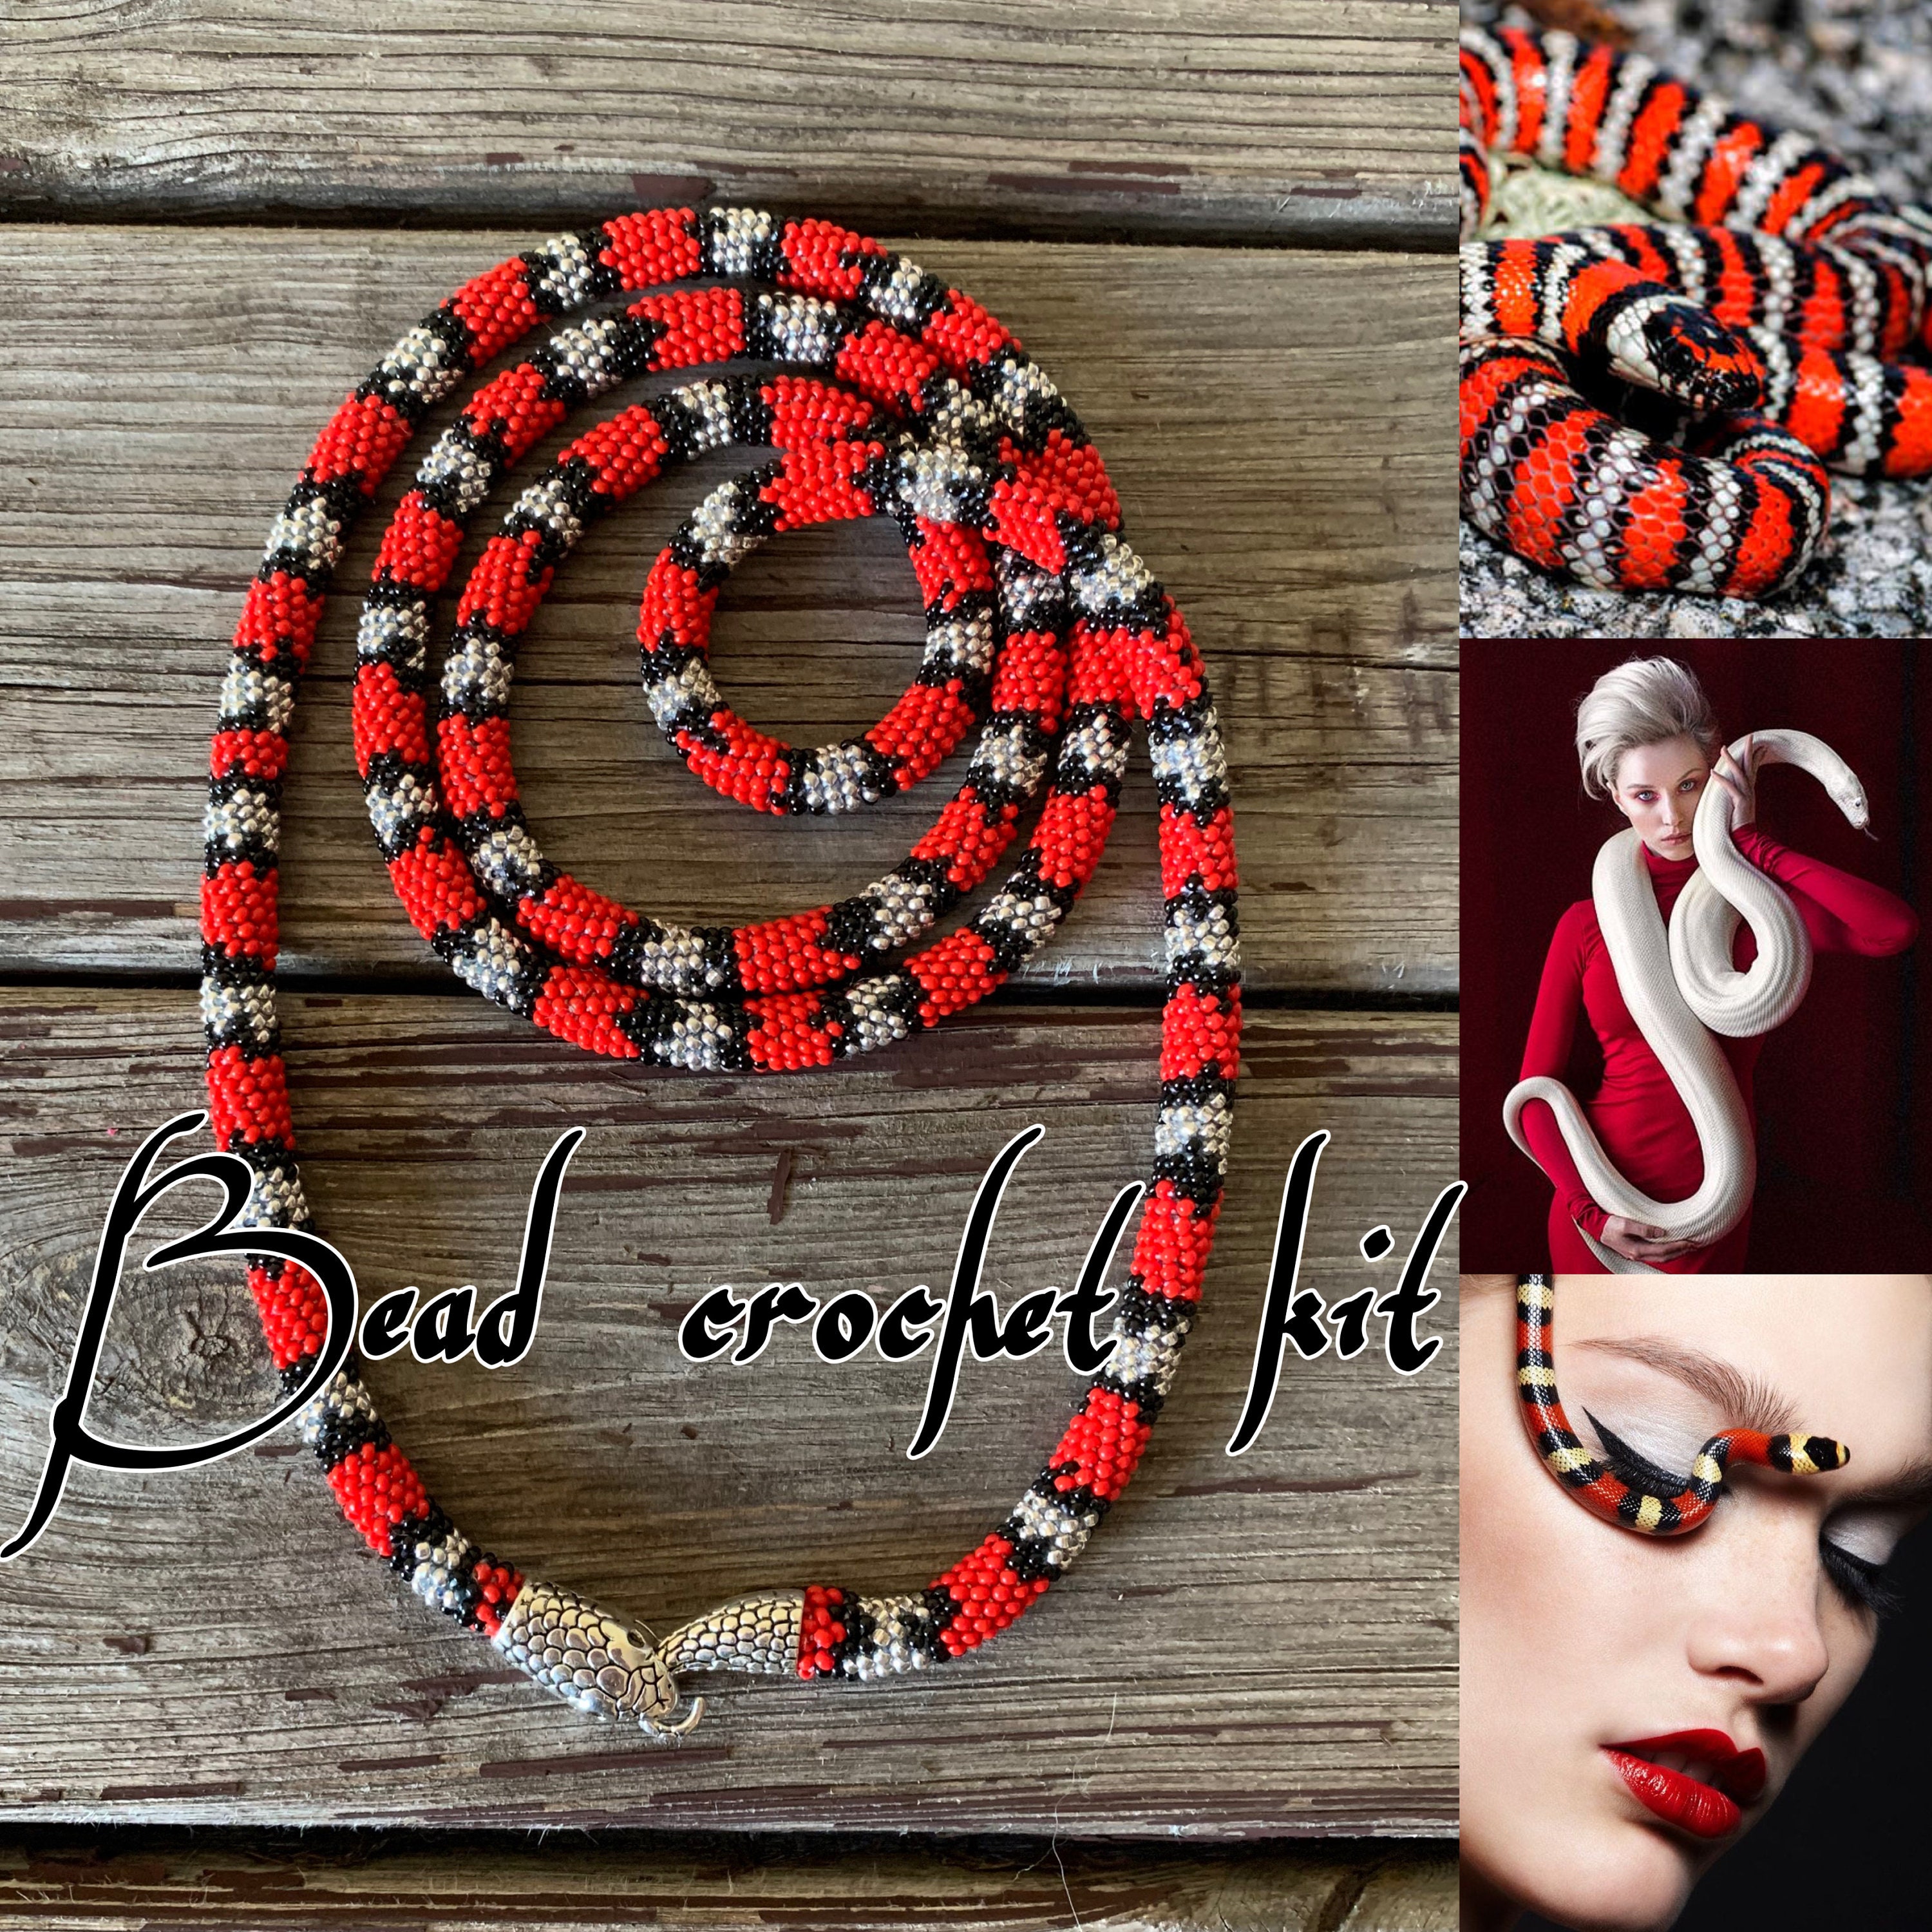 KIT to Make Bead Crochet Black Rope Necklace Bracelet Red Flowers Crochet  Seed Beaded Rope Jewelry Making KIT DIY Adult Craft 